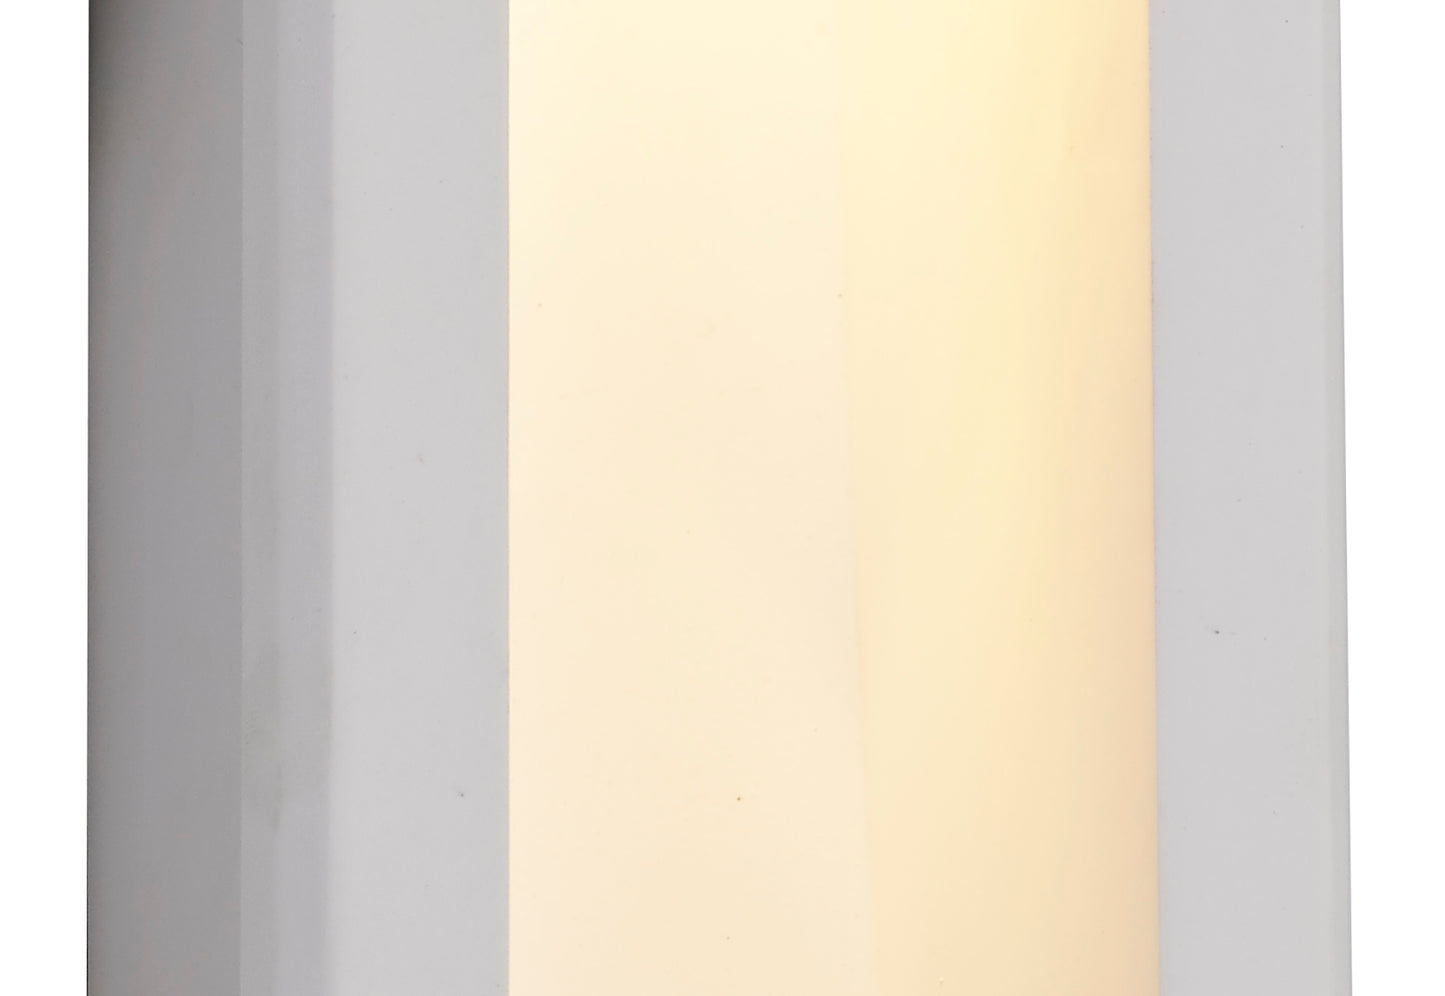 Canvas Recessed Wall Lamp